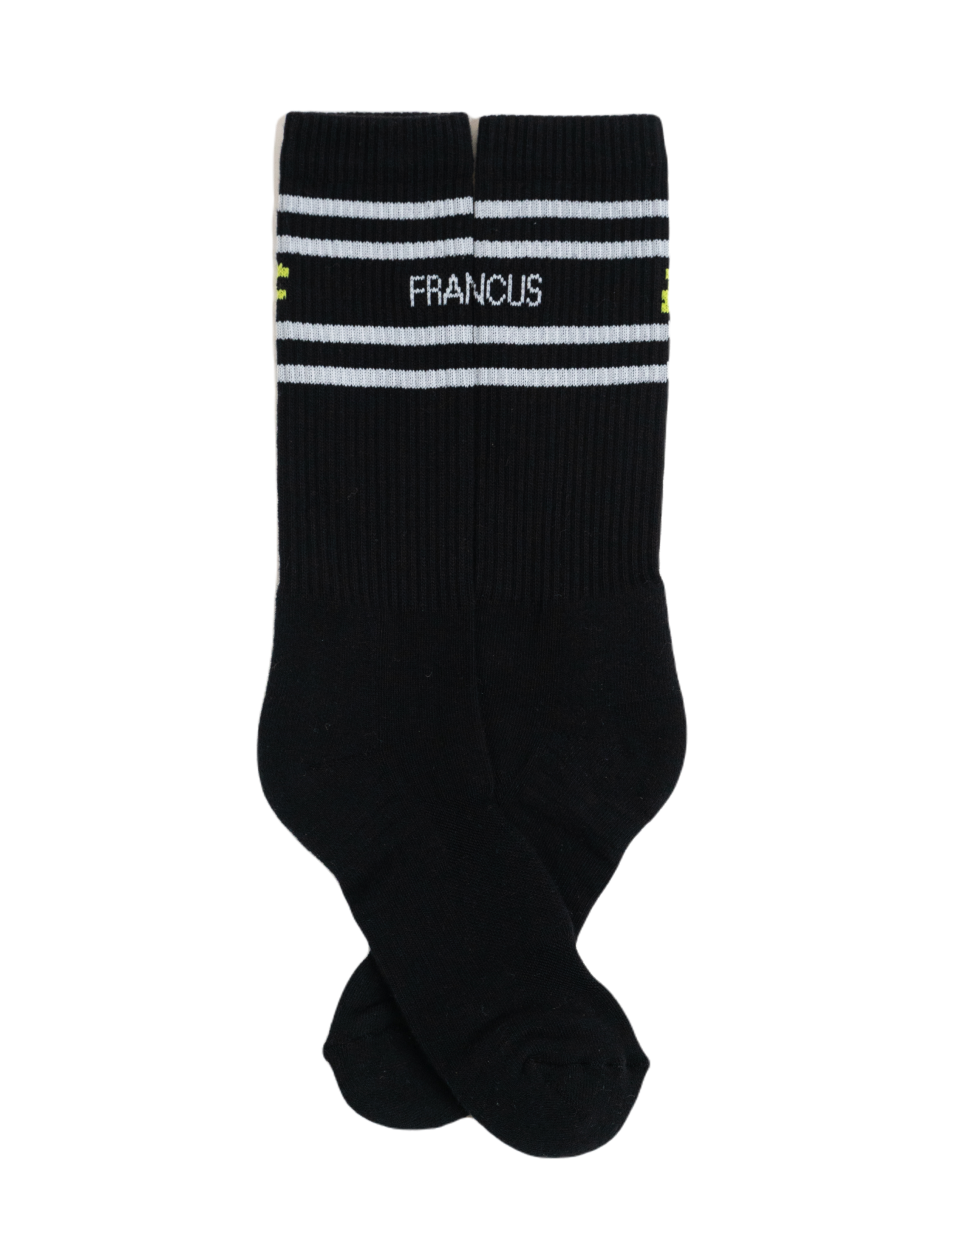 Chaussettes TENNIS - Coton bio - Made in France - Dream Act